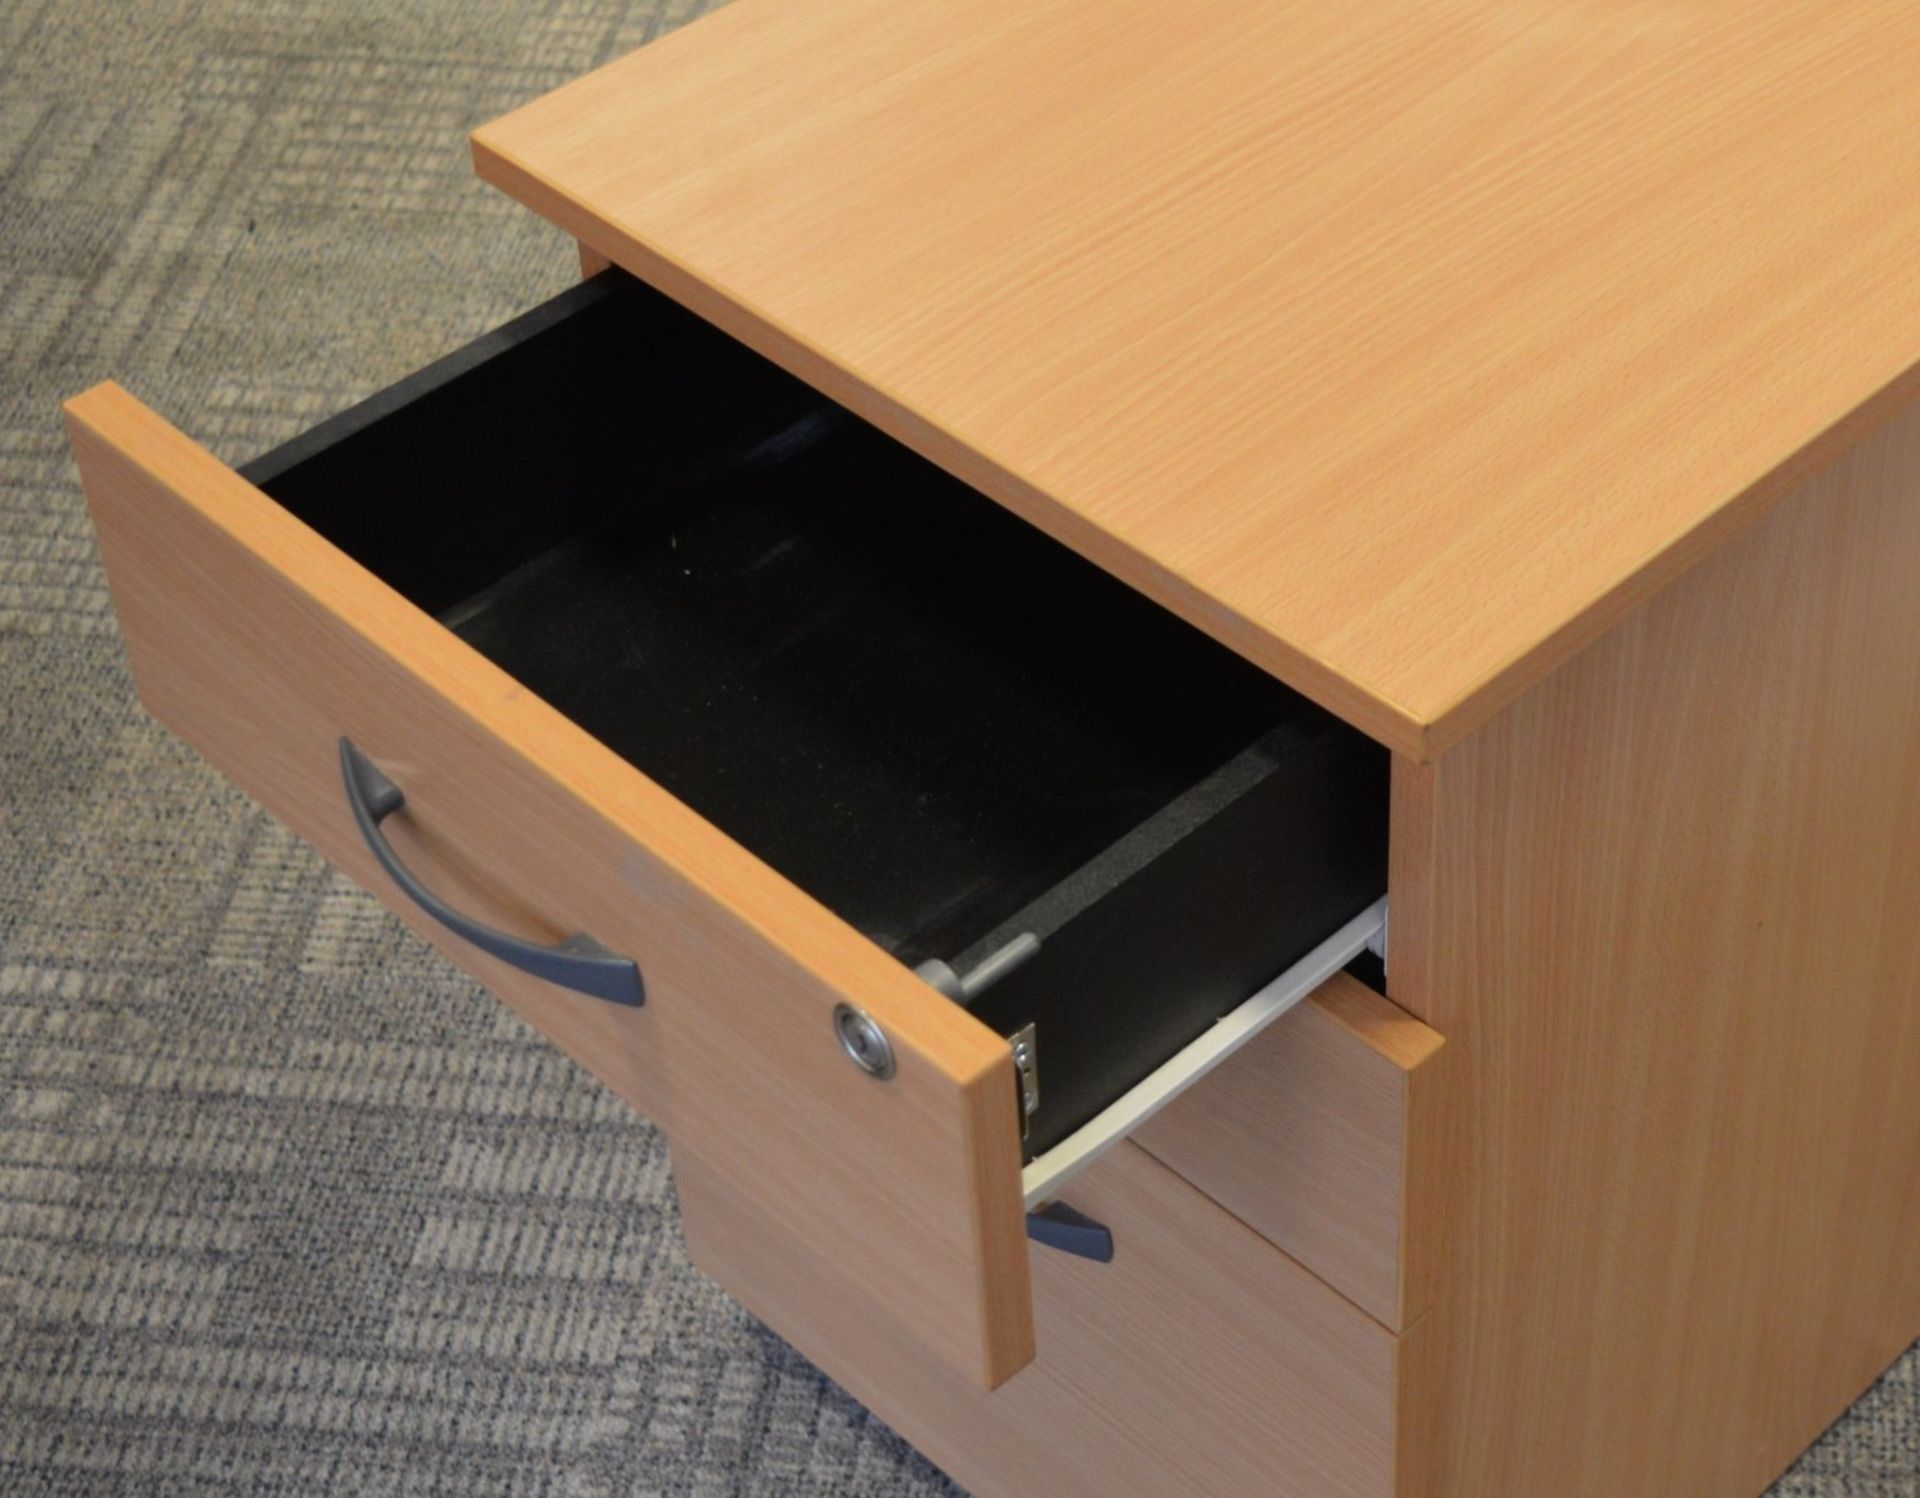 1 x Three Drawer Mobile Pedestal Drawers - With Key - Modern Beech Finish - Two Storage Drawers - Image 3 of 6